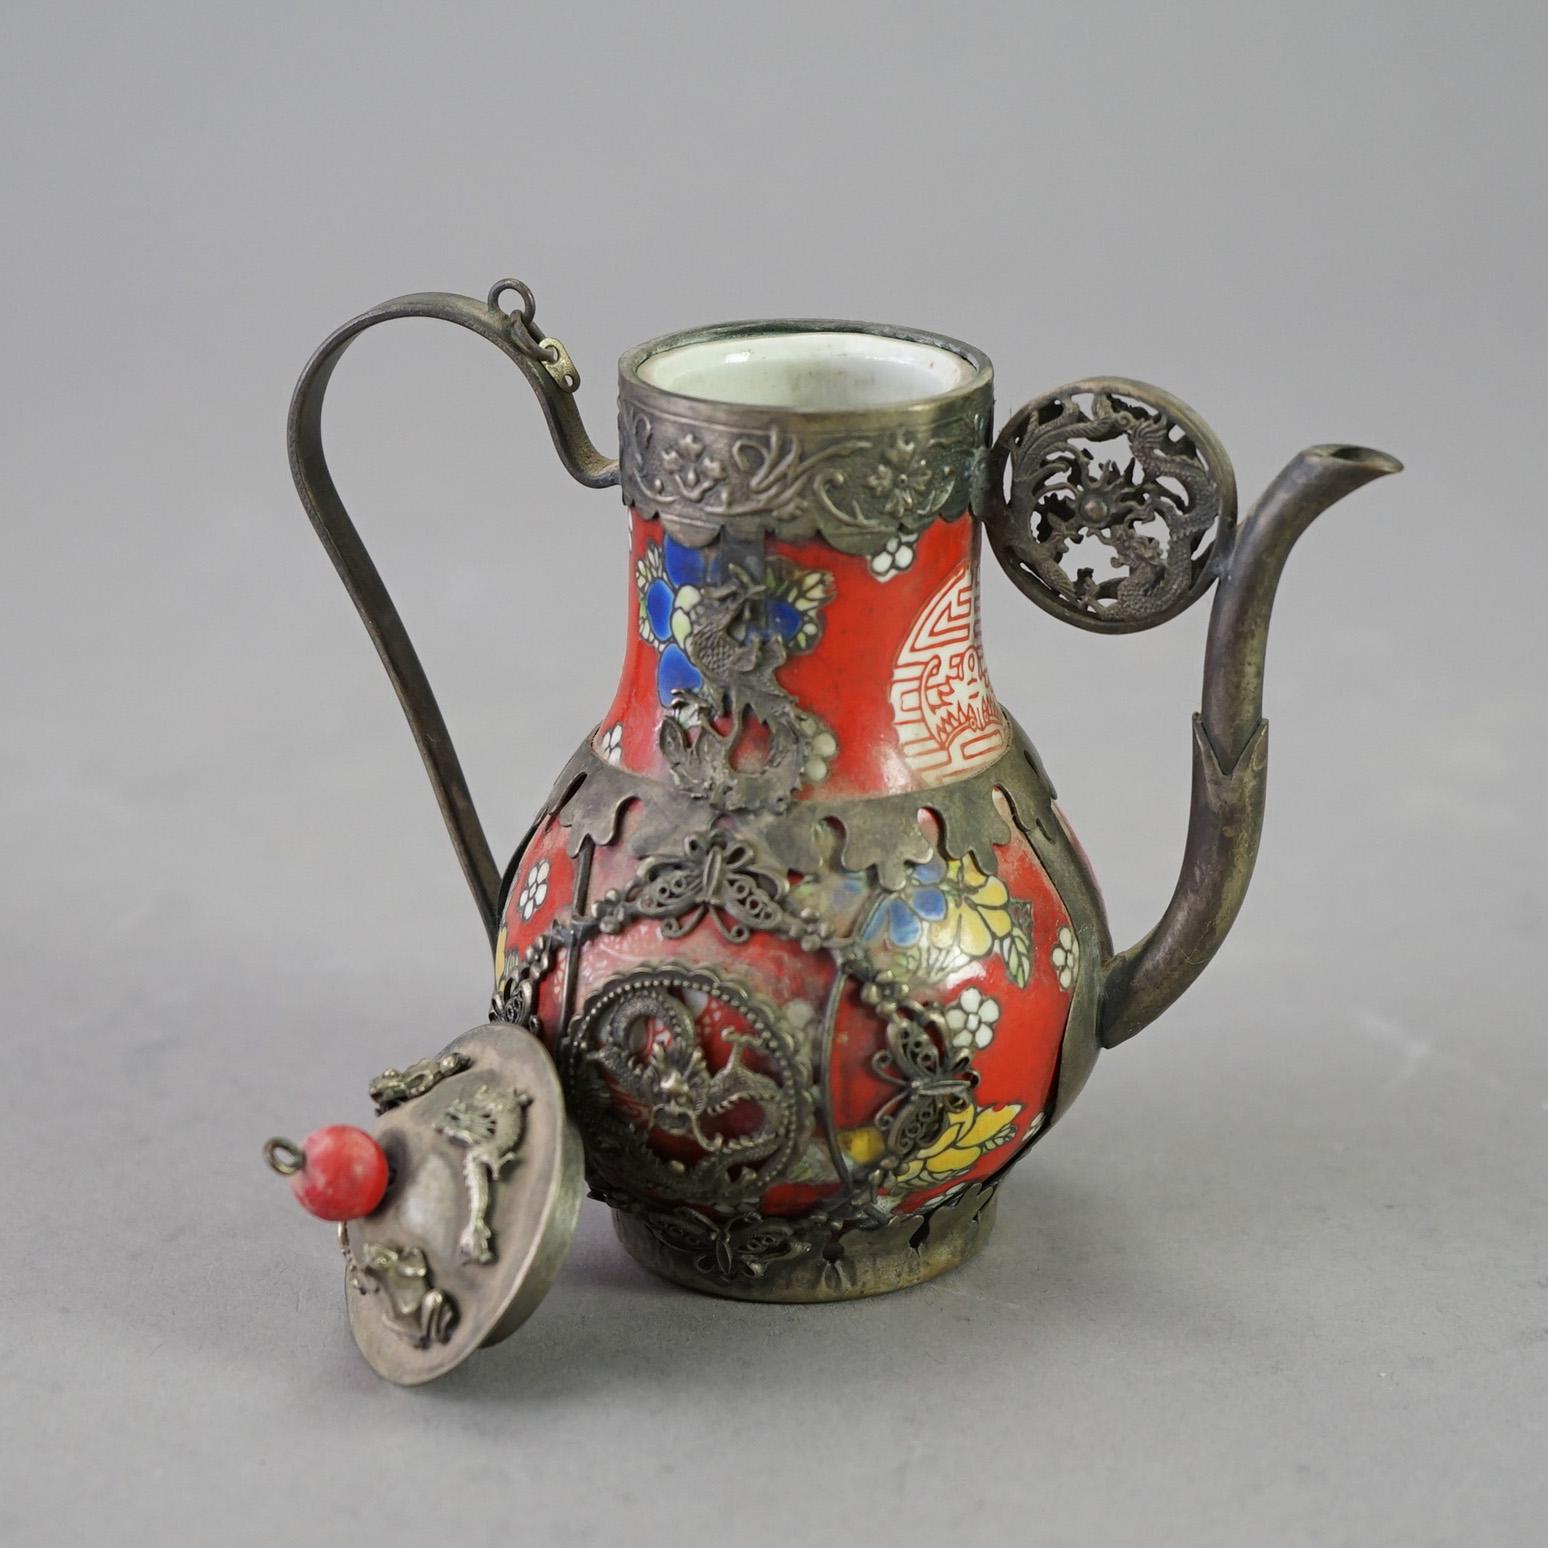 A miniature Chinese teapot offers porcelain vessel having floral design and silver overlay with dragons, frogs, and butterflies, stamped as photographed, 20th century

Measures- 5''H x 5''W x 3''D